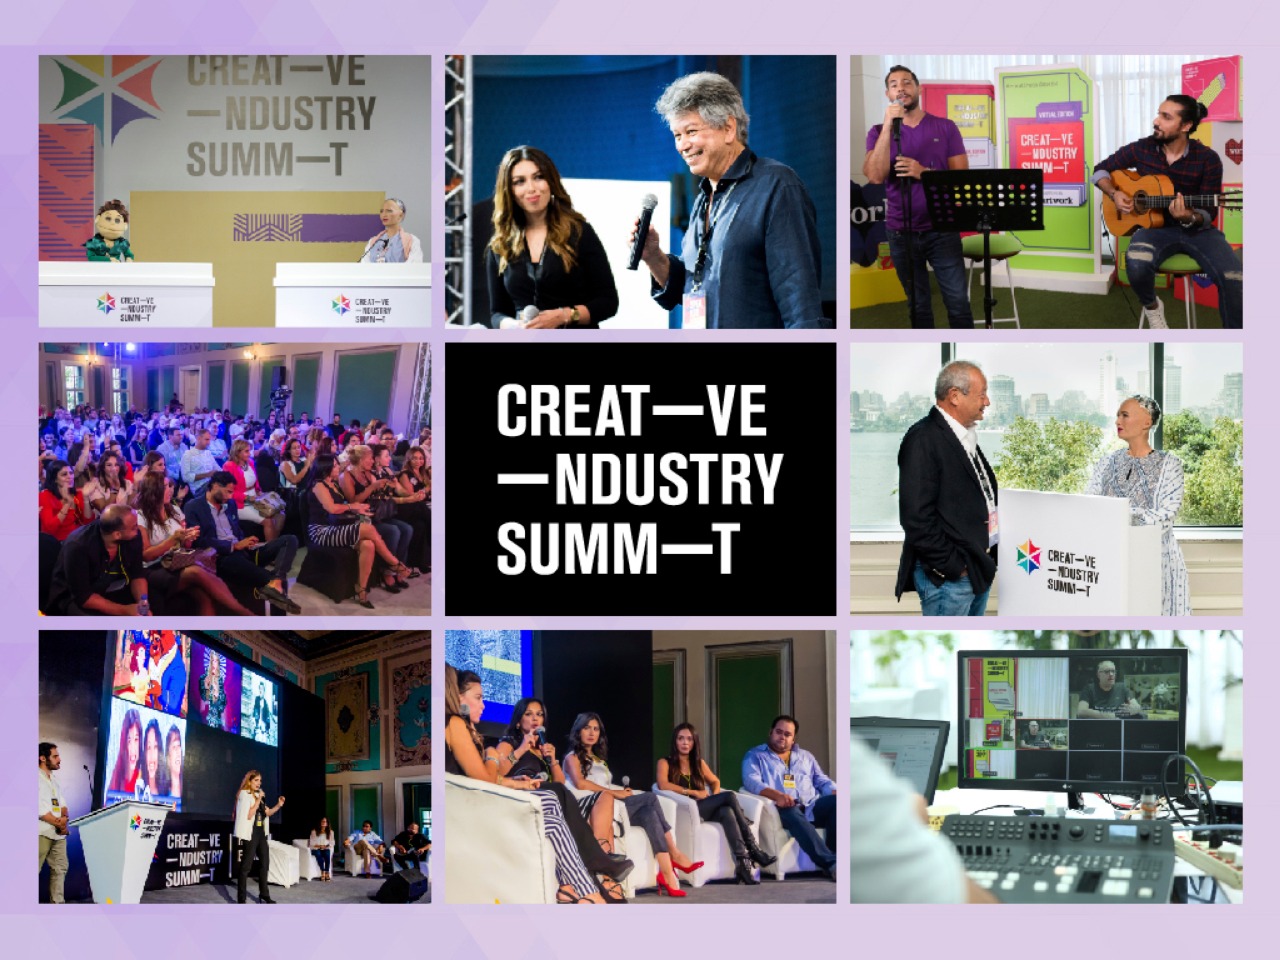 Creative Industry Summit to Make a Comeback, This Time in KSA